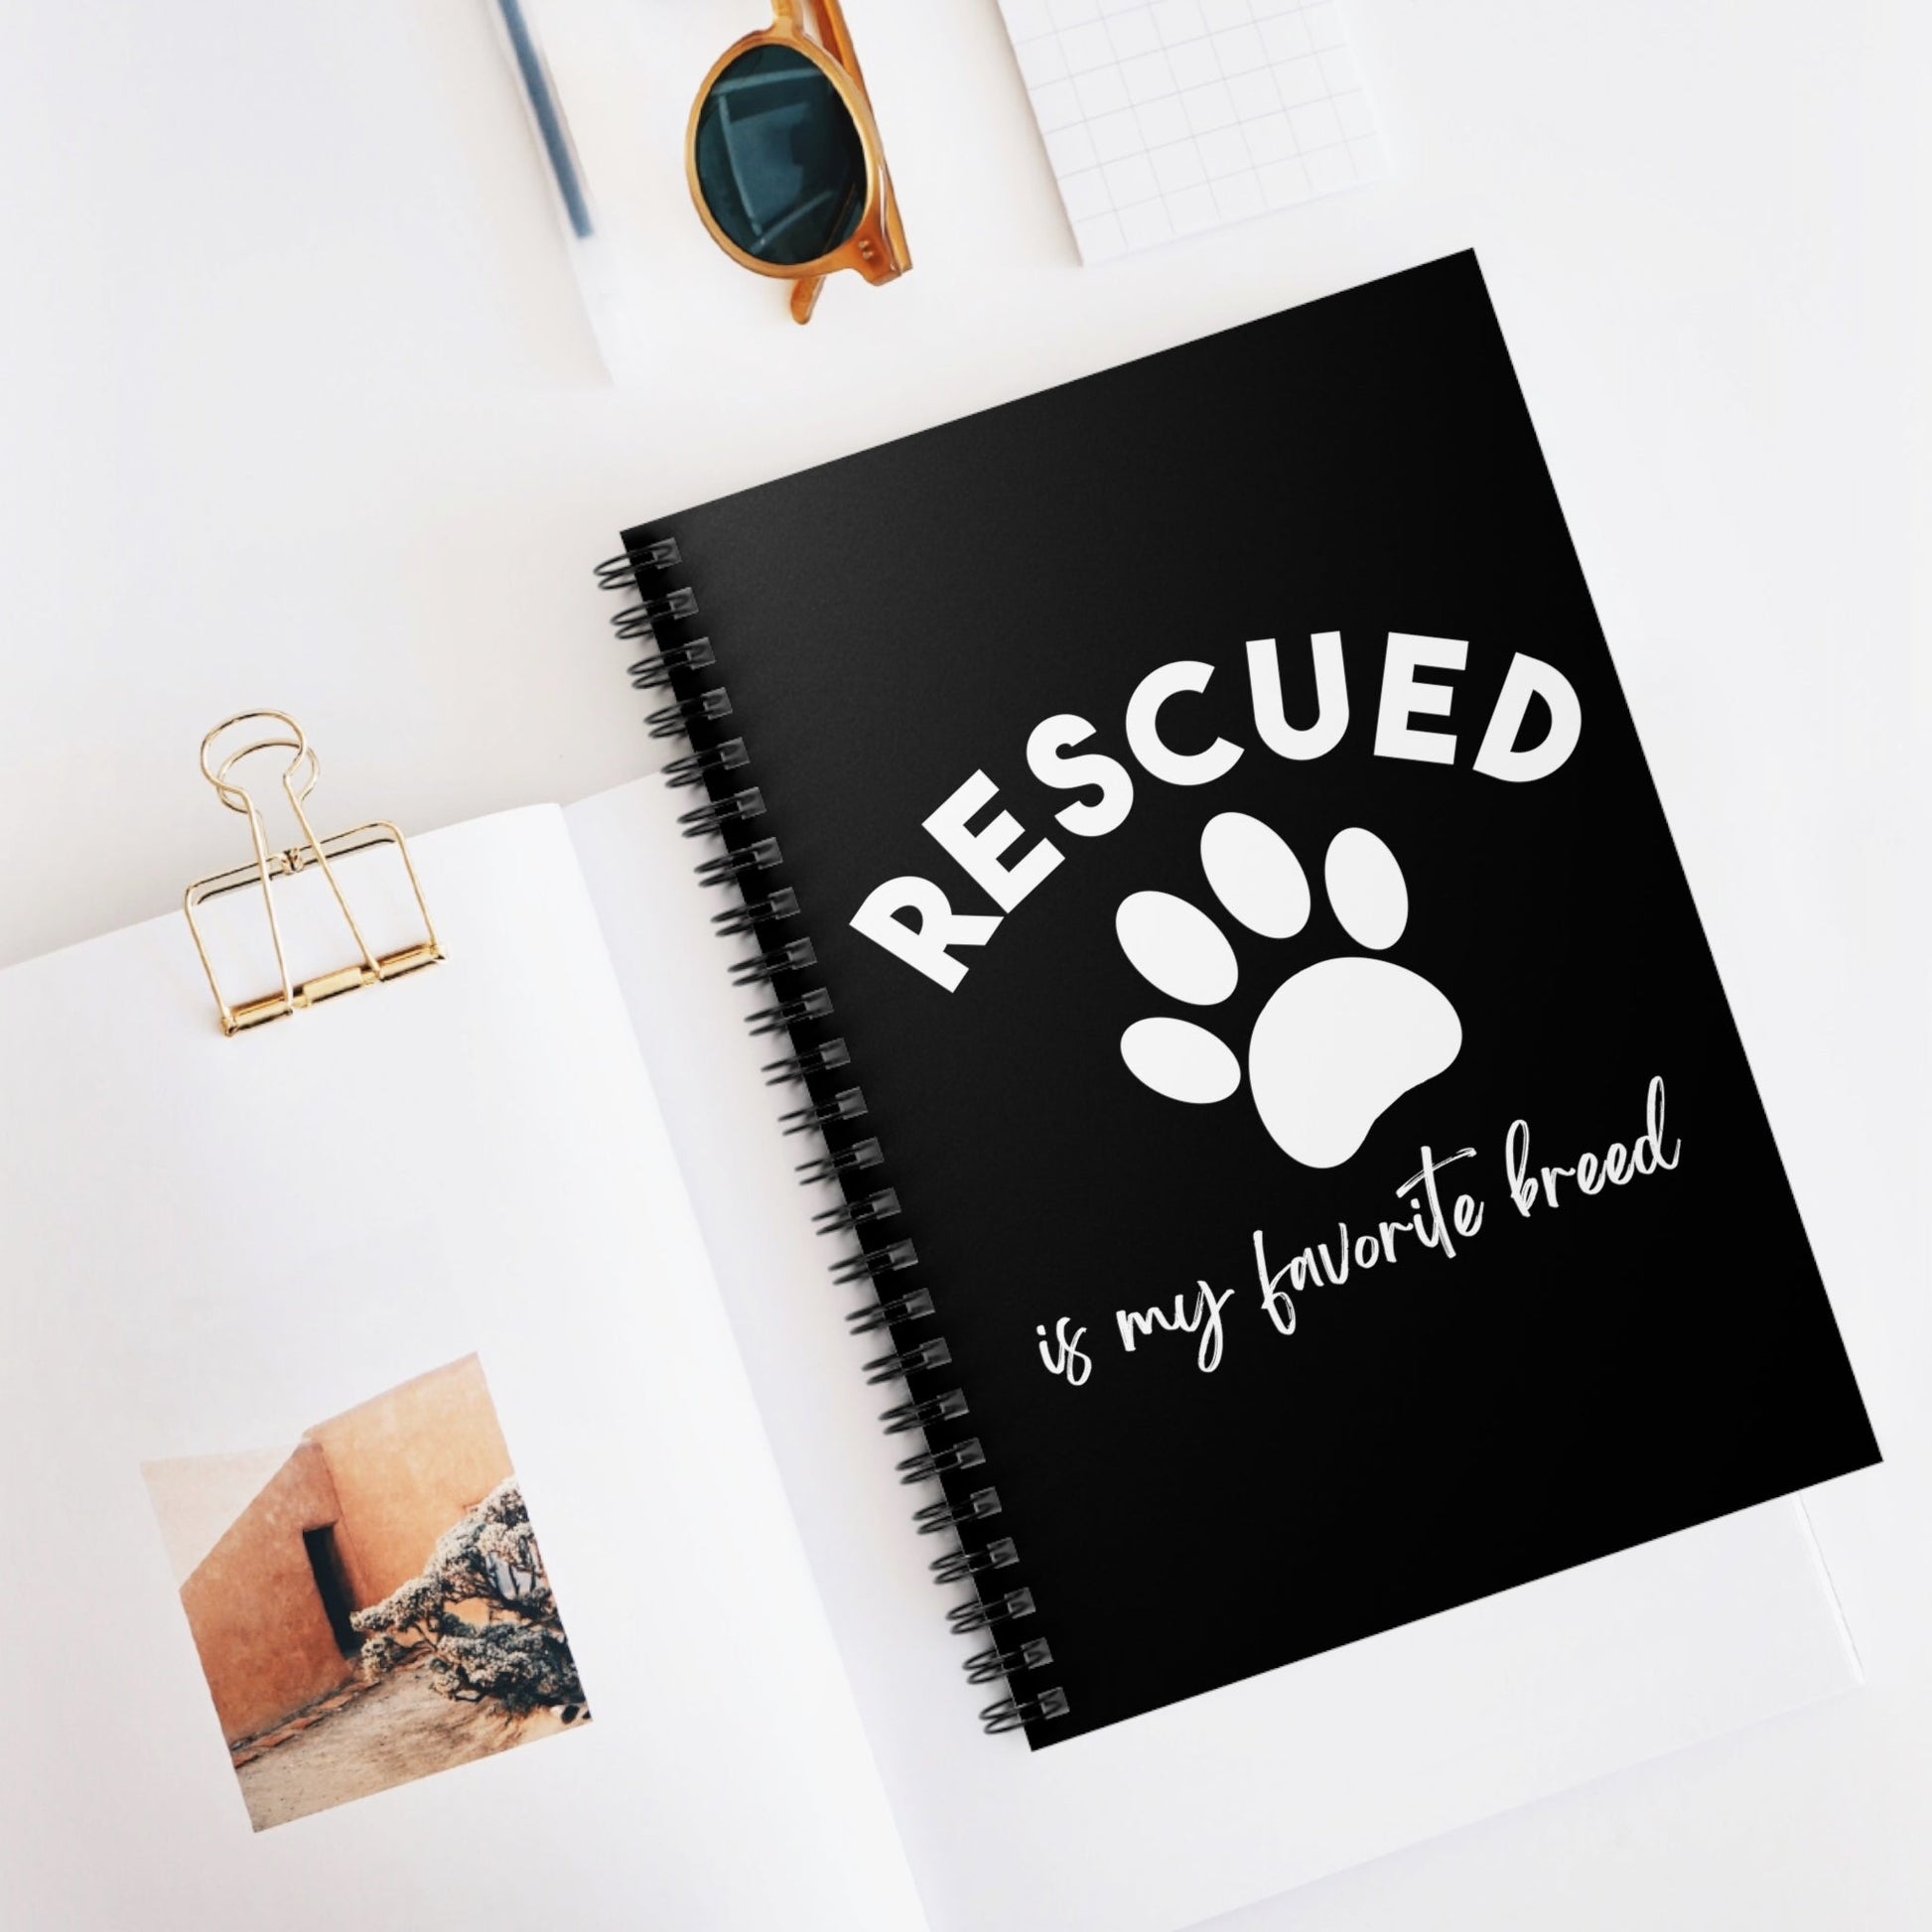 Rescued Is My Favorite Breed Paw | Notebook - Detezi Designs-19047337797028813945